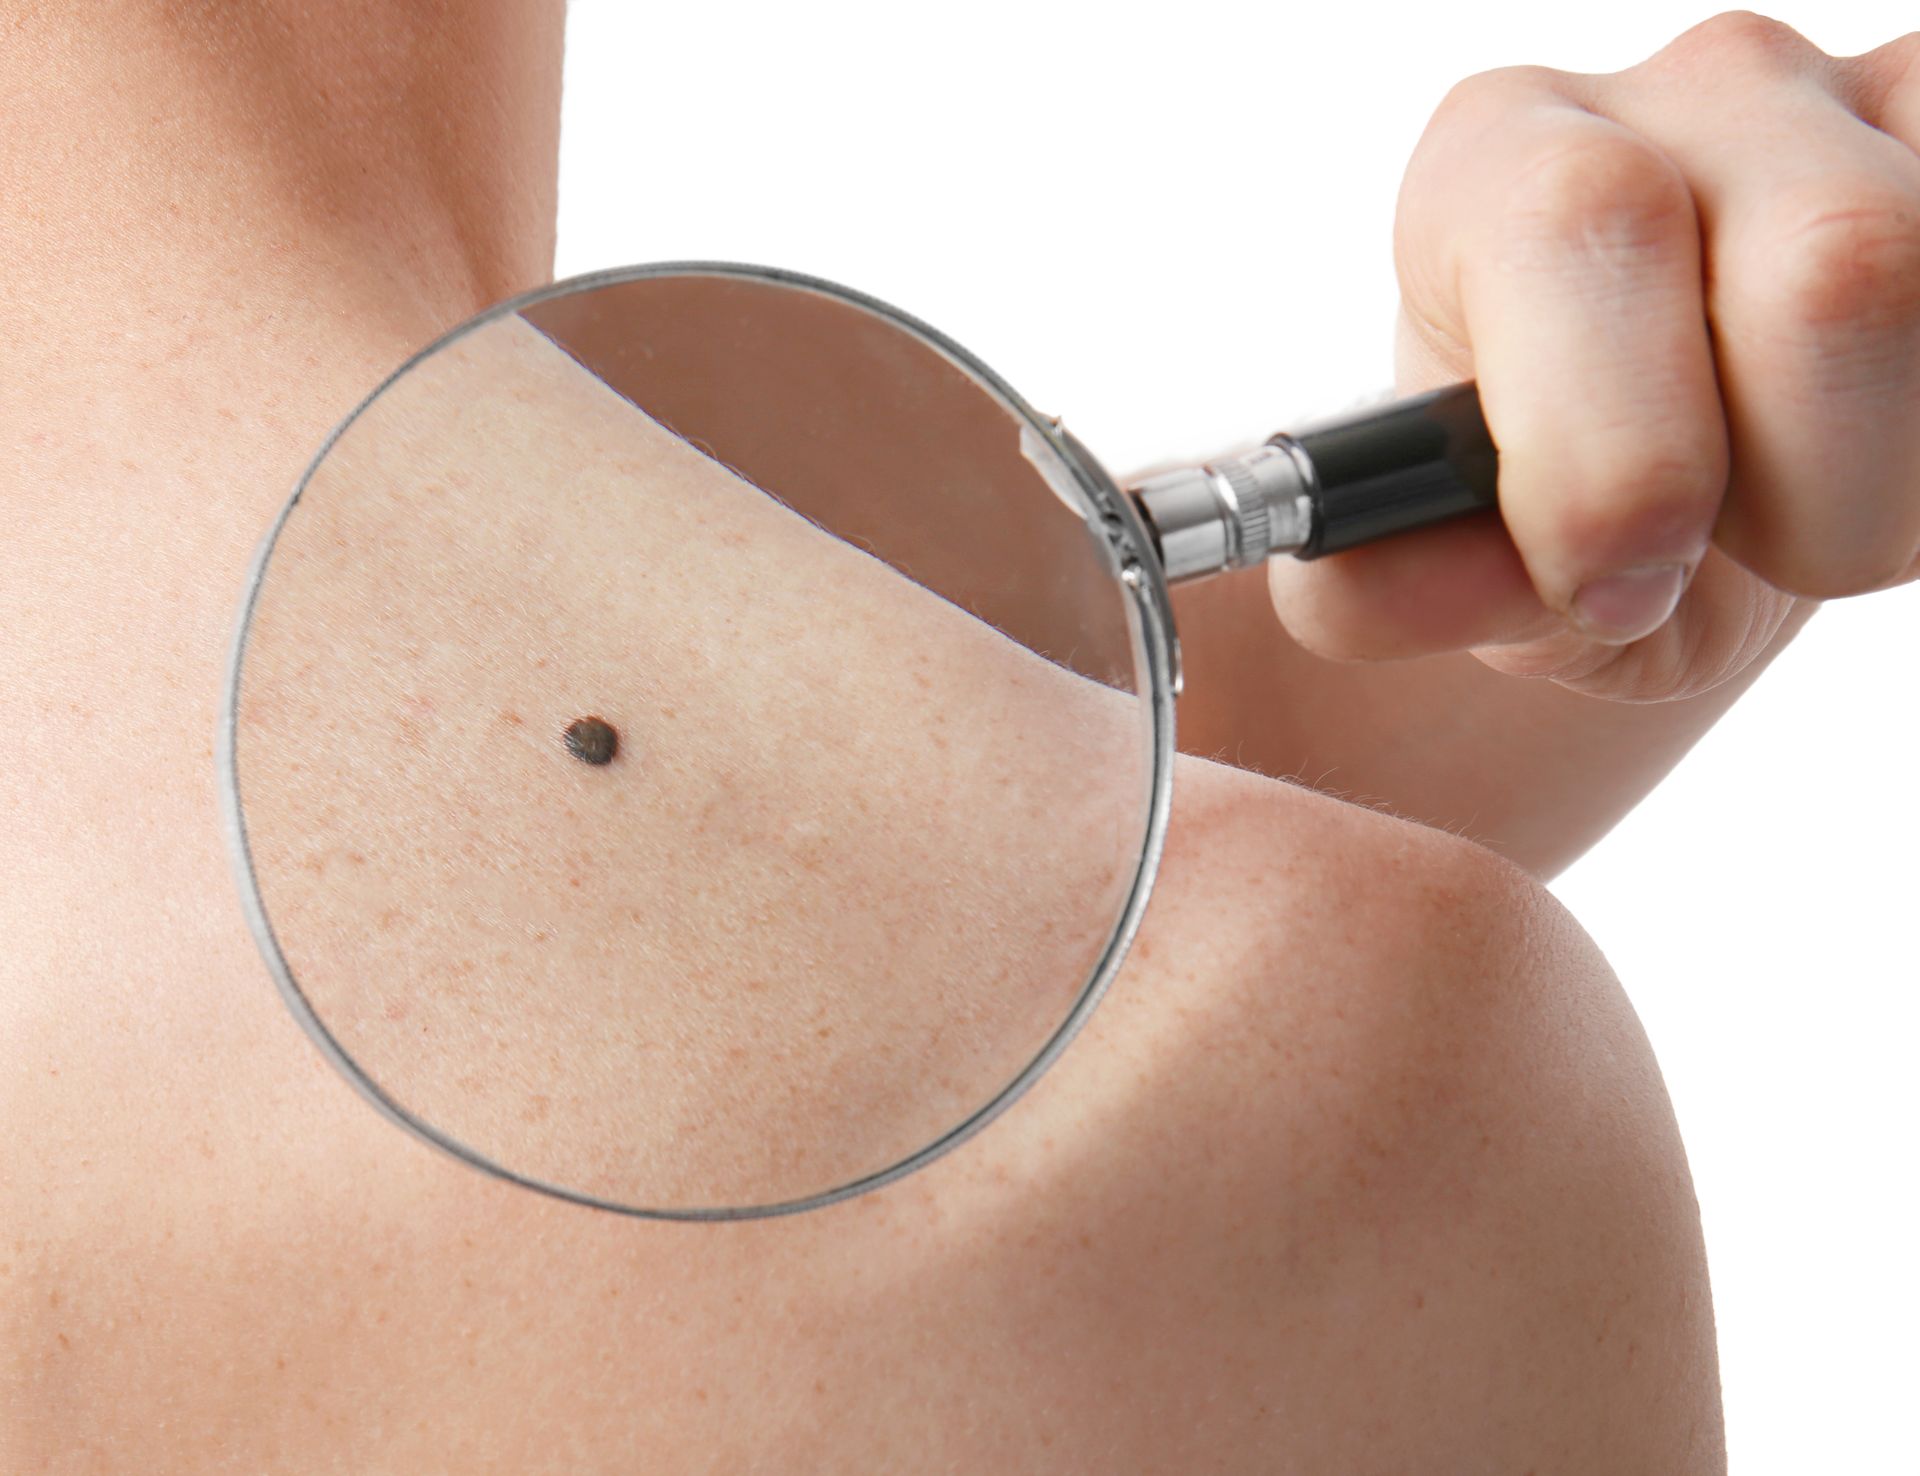 A person is looking at a small black spot on their back with a magnifying glass